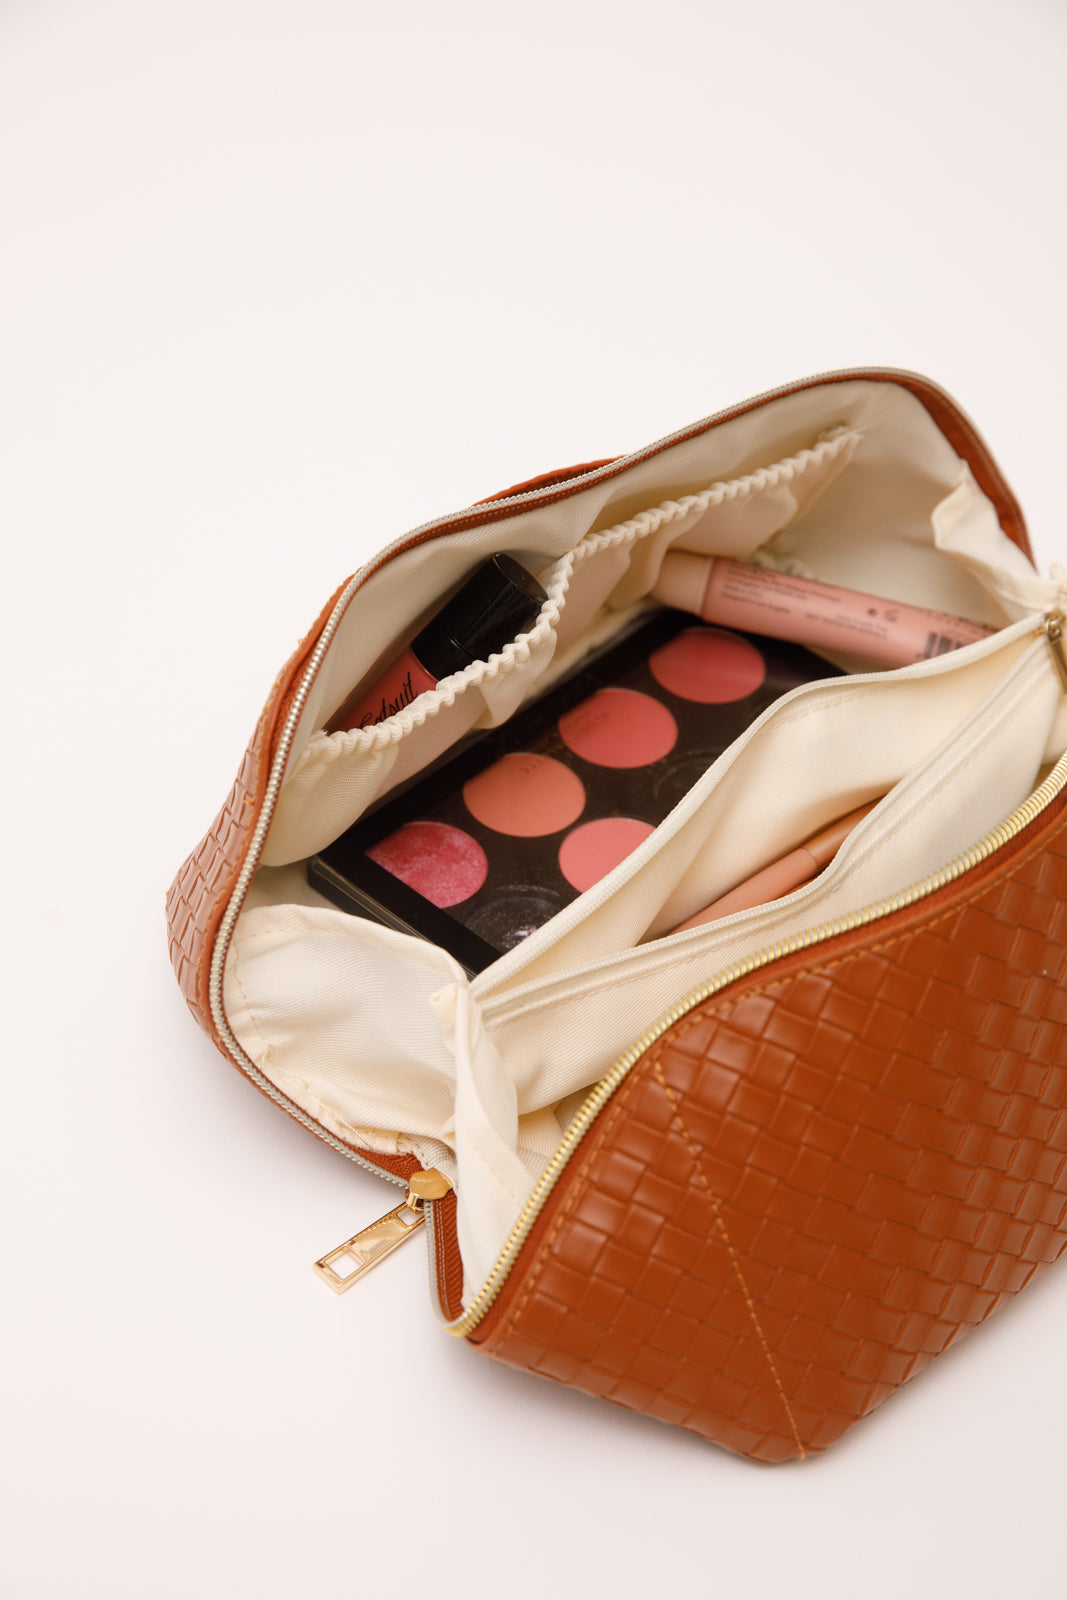 Makeup Pouch - Buy Large Capacity Vanity Pouch Online